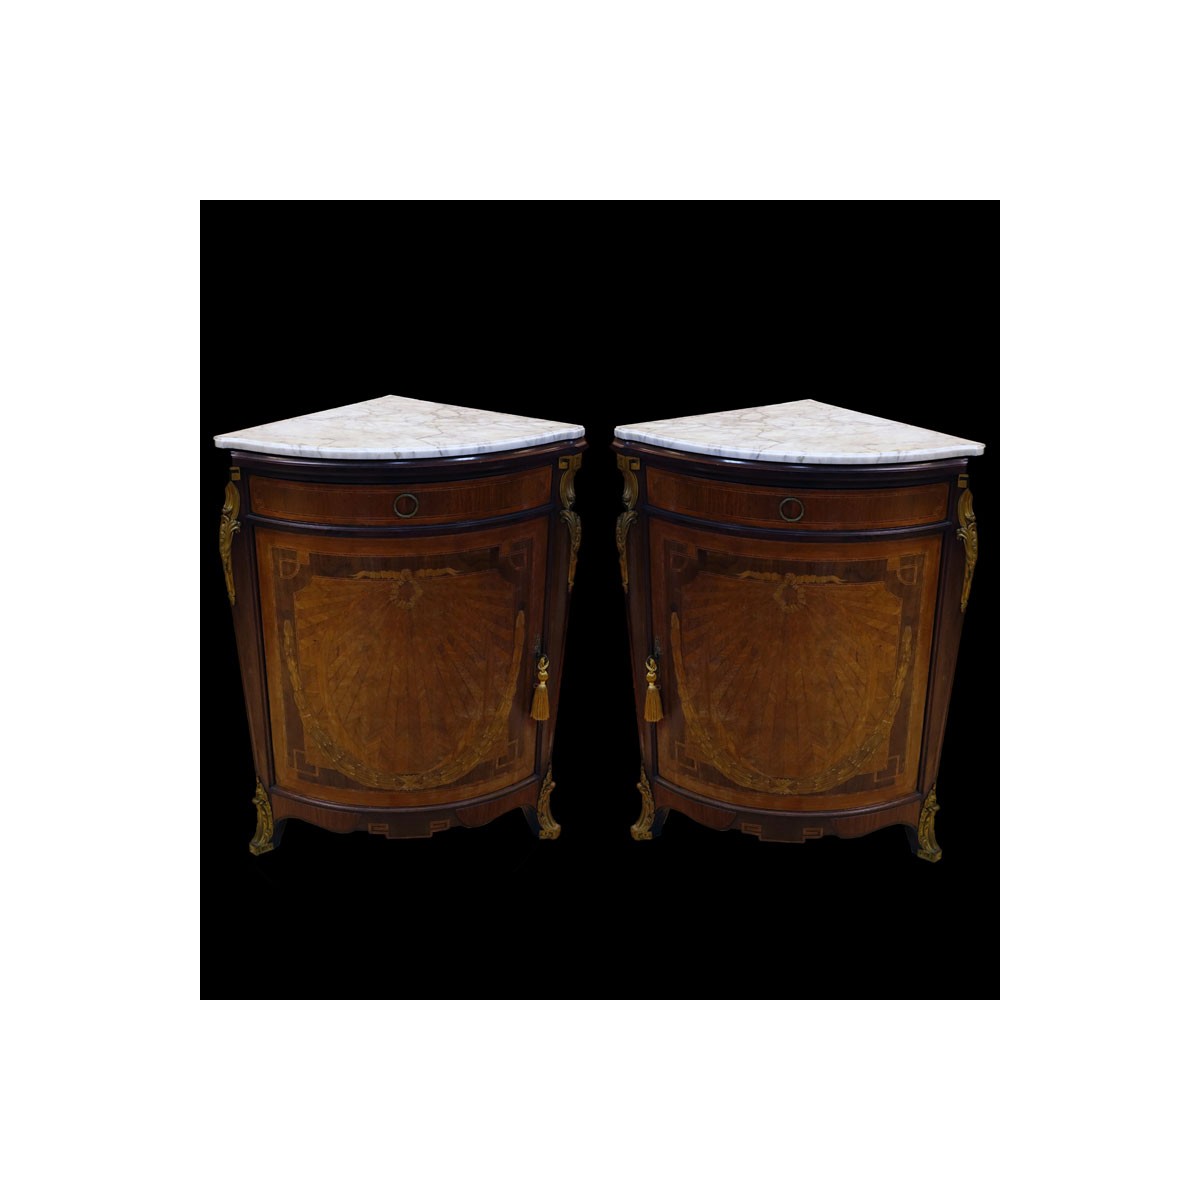 Pair of Antique French Corner Cabinets